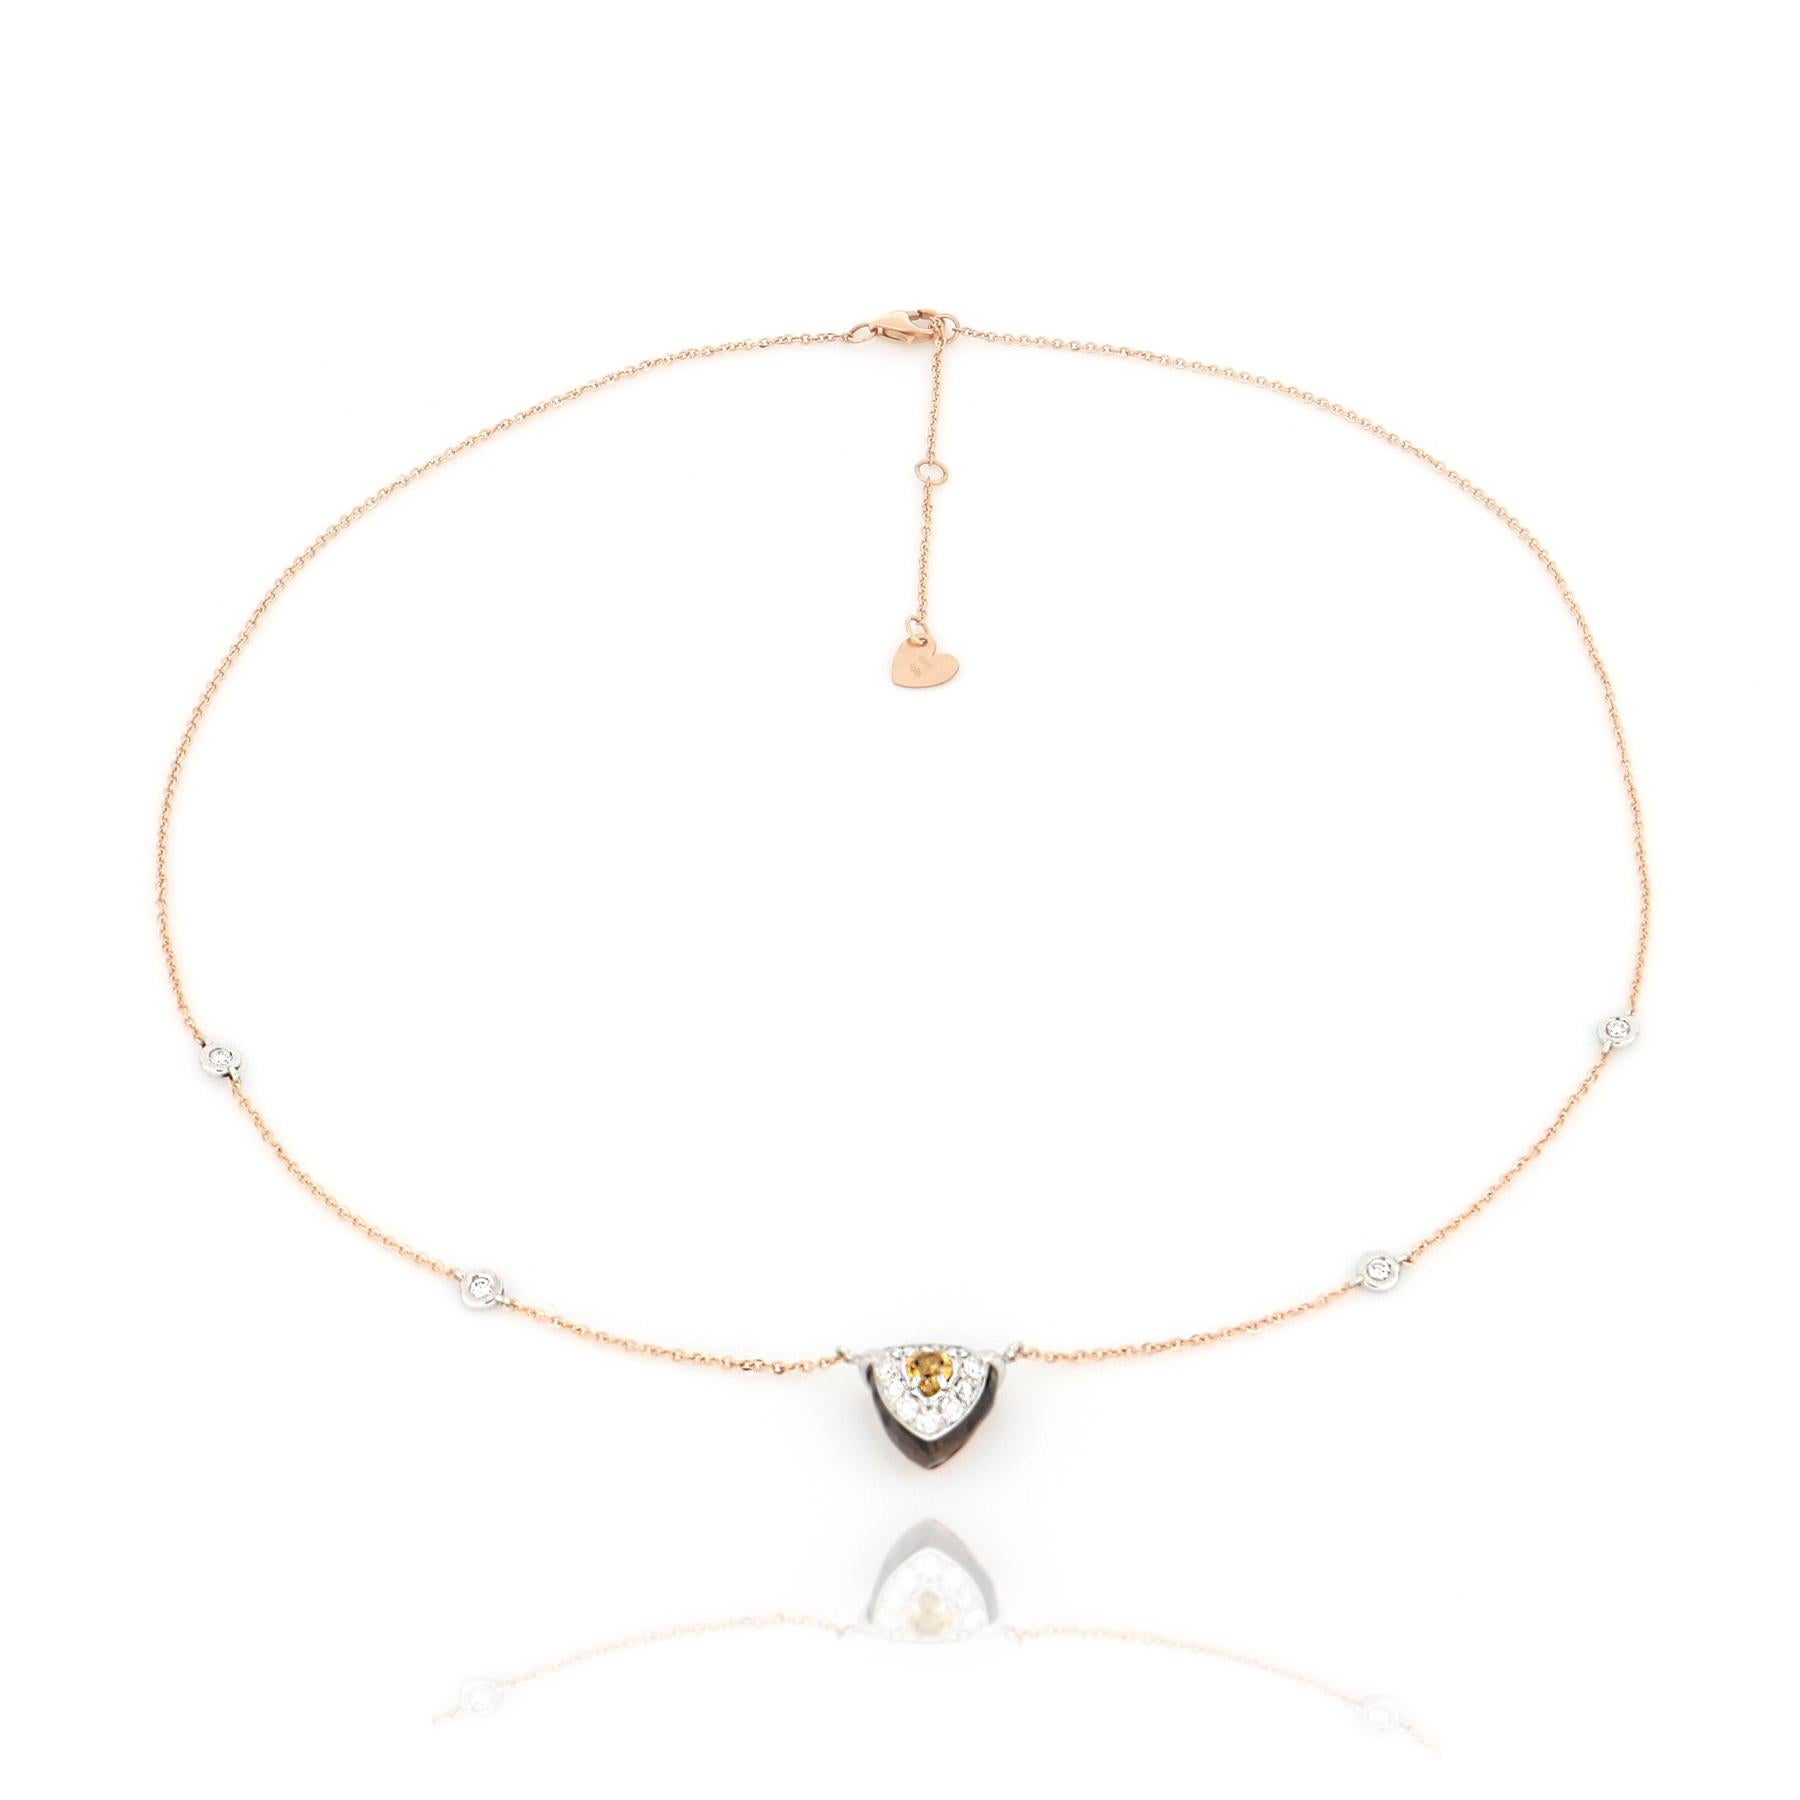 A golden citrine, a brown quartz with elegant transparency and a diamonds pavé are the focus on the center of this rose gold necklace. A poetic symphony of elegance for a unique style.

Necklace lenght 43 cm with extension at 45 cm and 48 cm, rose